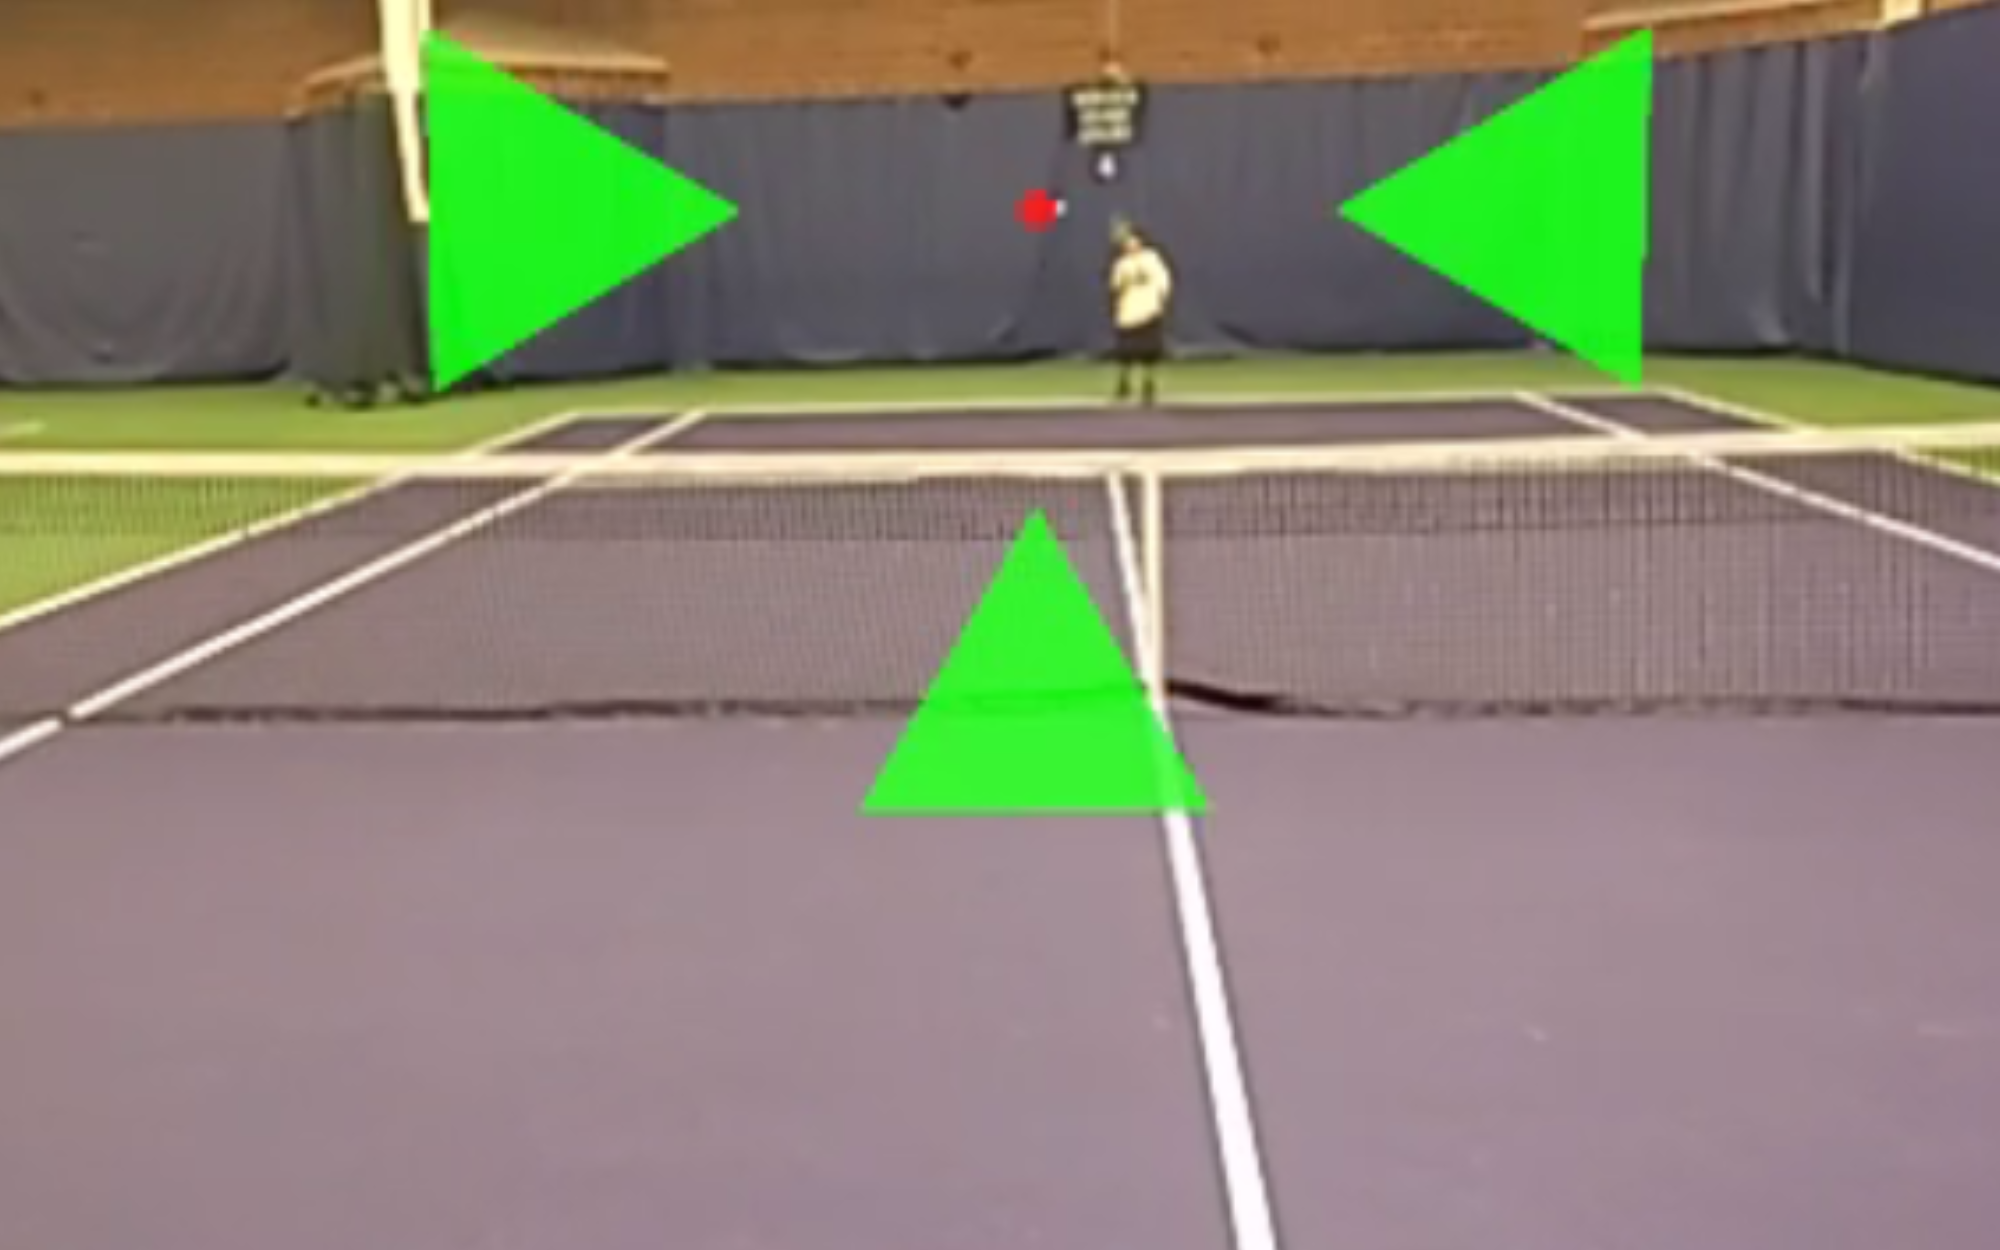 A first-person point-of-view image of a low vision person playing tennis while using ARTennis. The tennis ball is covered by a red dot, while four green arrows point towards the ball, forming a crosshair.